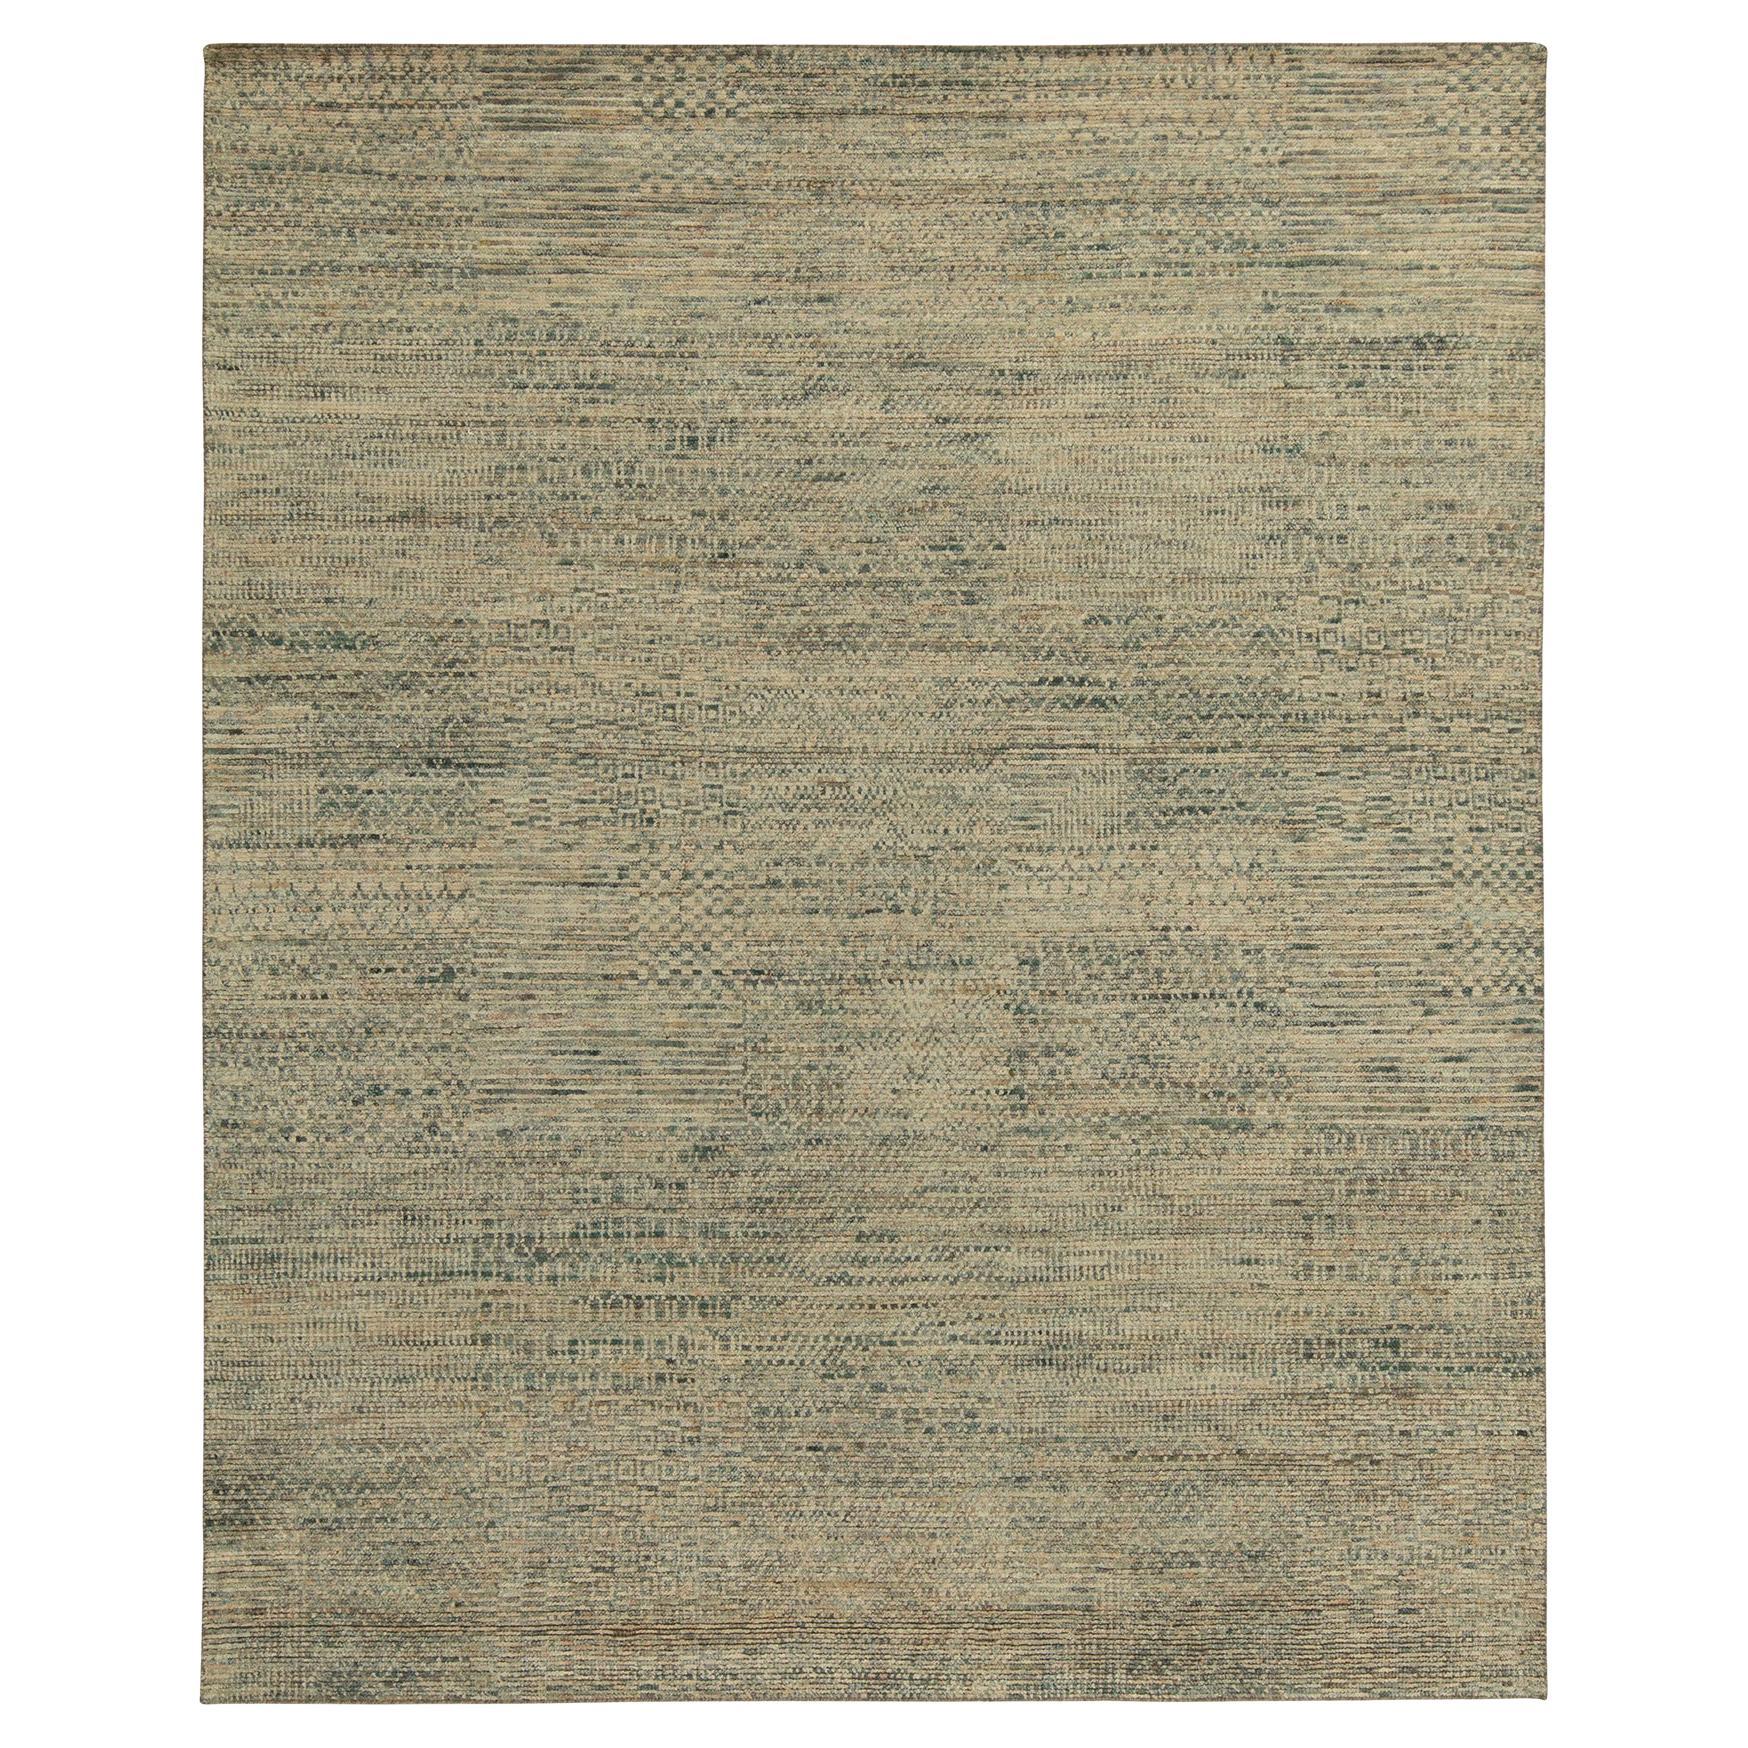 Hand-knotted in luxurious quality silk, a bold 8 x 10 contemporary rug with exceptional textural element and visual depth. This particular modern design displays a series of squared delegations of patterns united by the striae of beige and blue